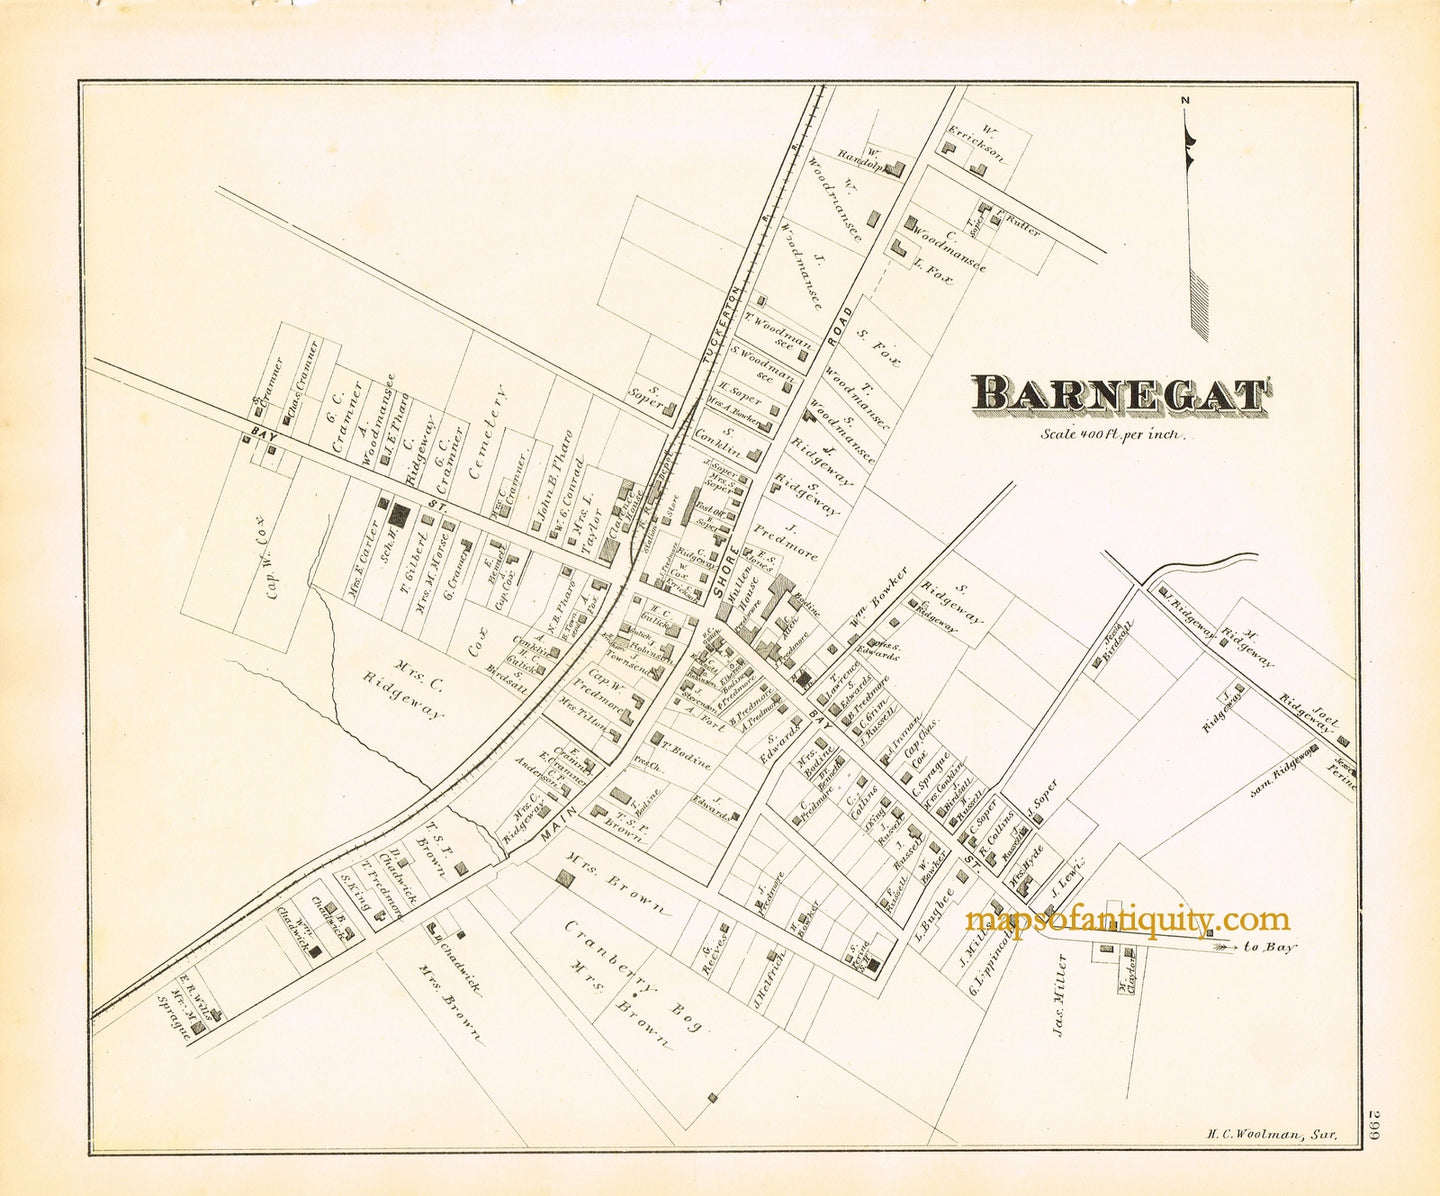 Black-and-White-Engraved-Antique-Map-Barnegat-N.J.*********-United-States-New-Jersey-1878-Woolman-&-Rose-Maps-Of-Antiquity